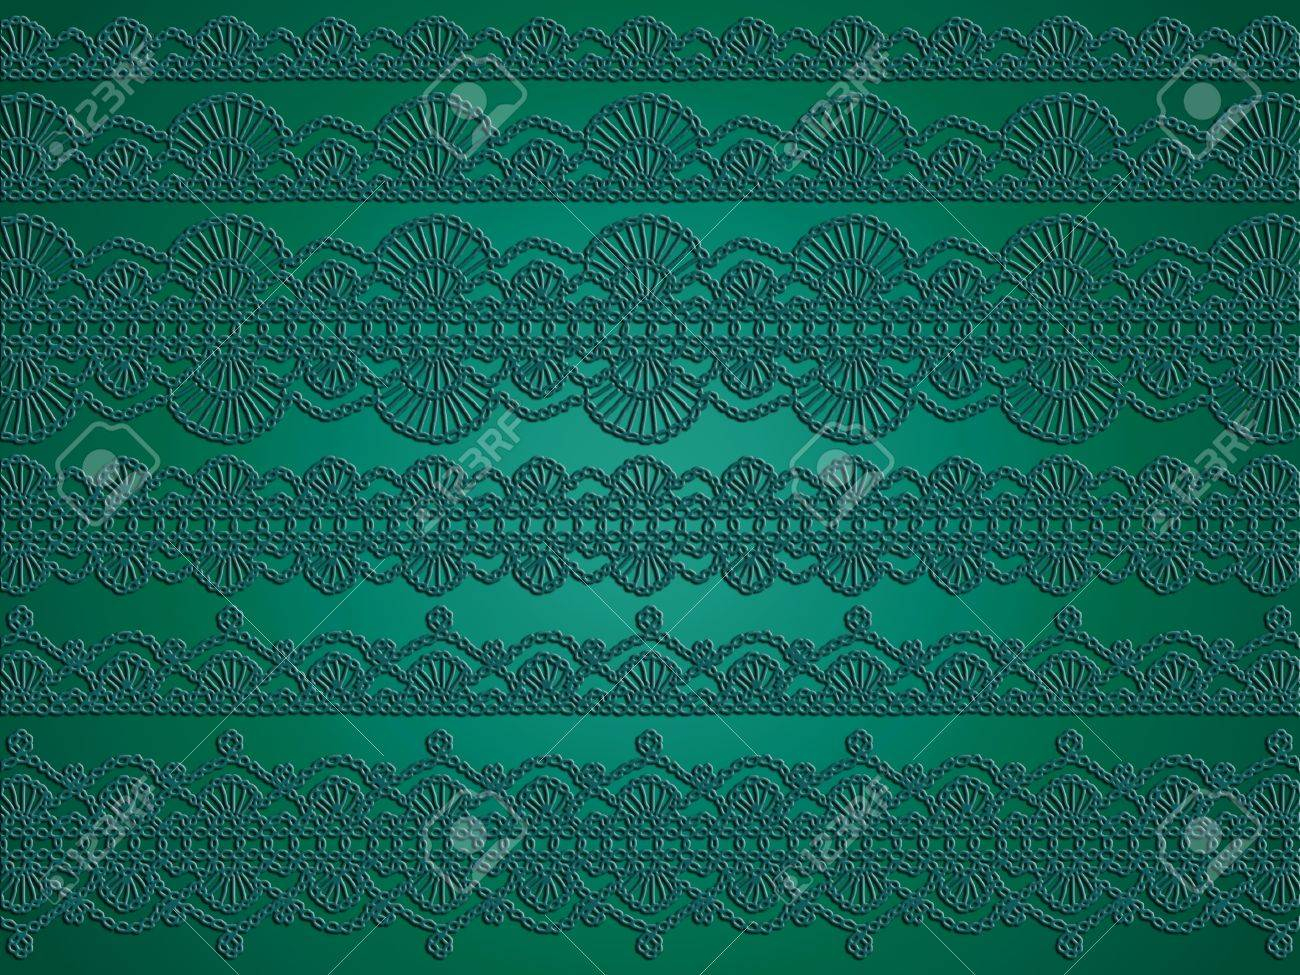 Crochet Lace Patterns Sophisticated Green Wallpaper With Various Crochet Lace Patterns